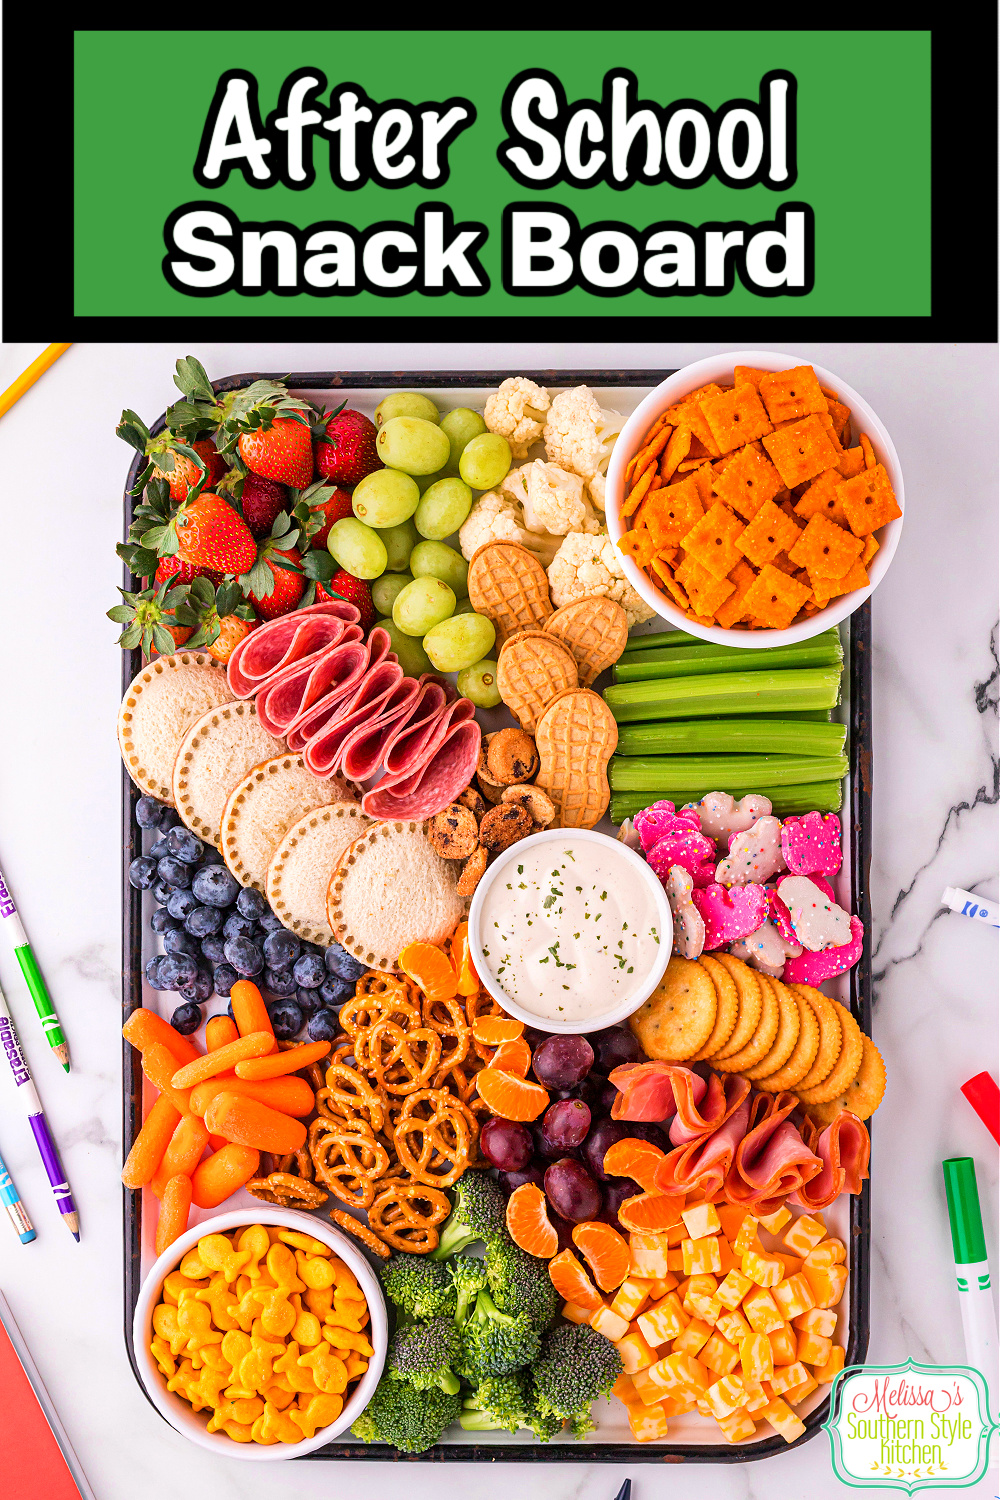 Looking for a way to get the kids to eat more fruits and vegetables? Create an After School Snack Board filled with all the good snacks! #snackboard #afterschoolsnacks #easysnackrecipes #uncrustables #easyrecipes #charcuterieideas #snacks #PB&Jsandwiches #ranchdip #charcuterie via @melissasssk